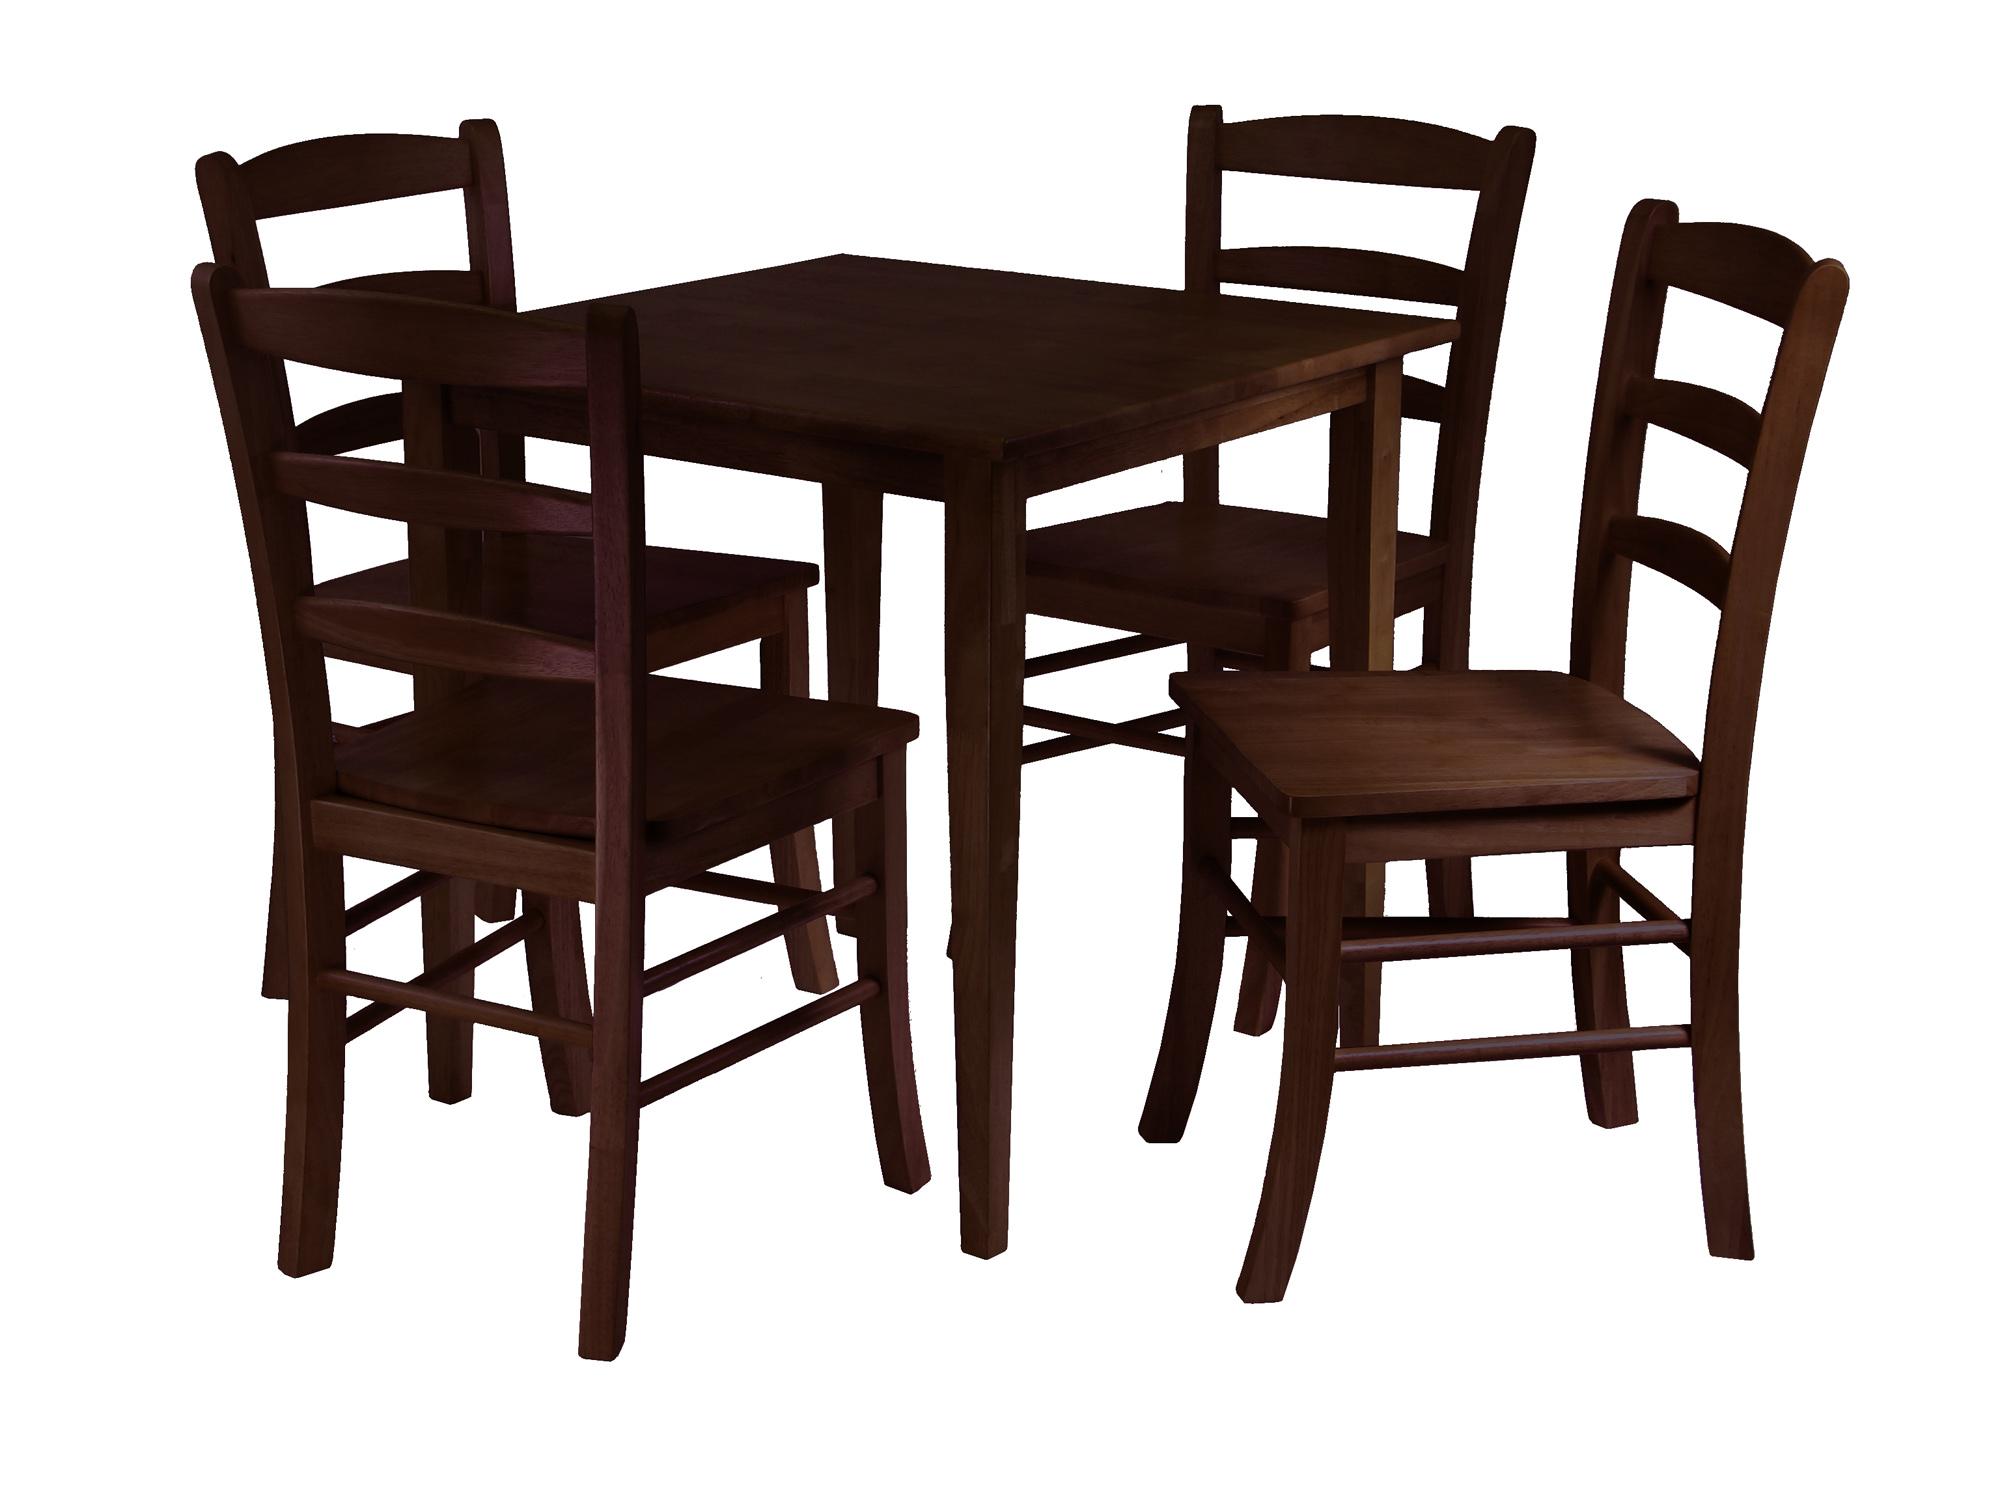 Free clipart table and chairs